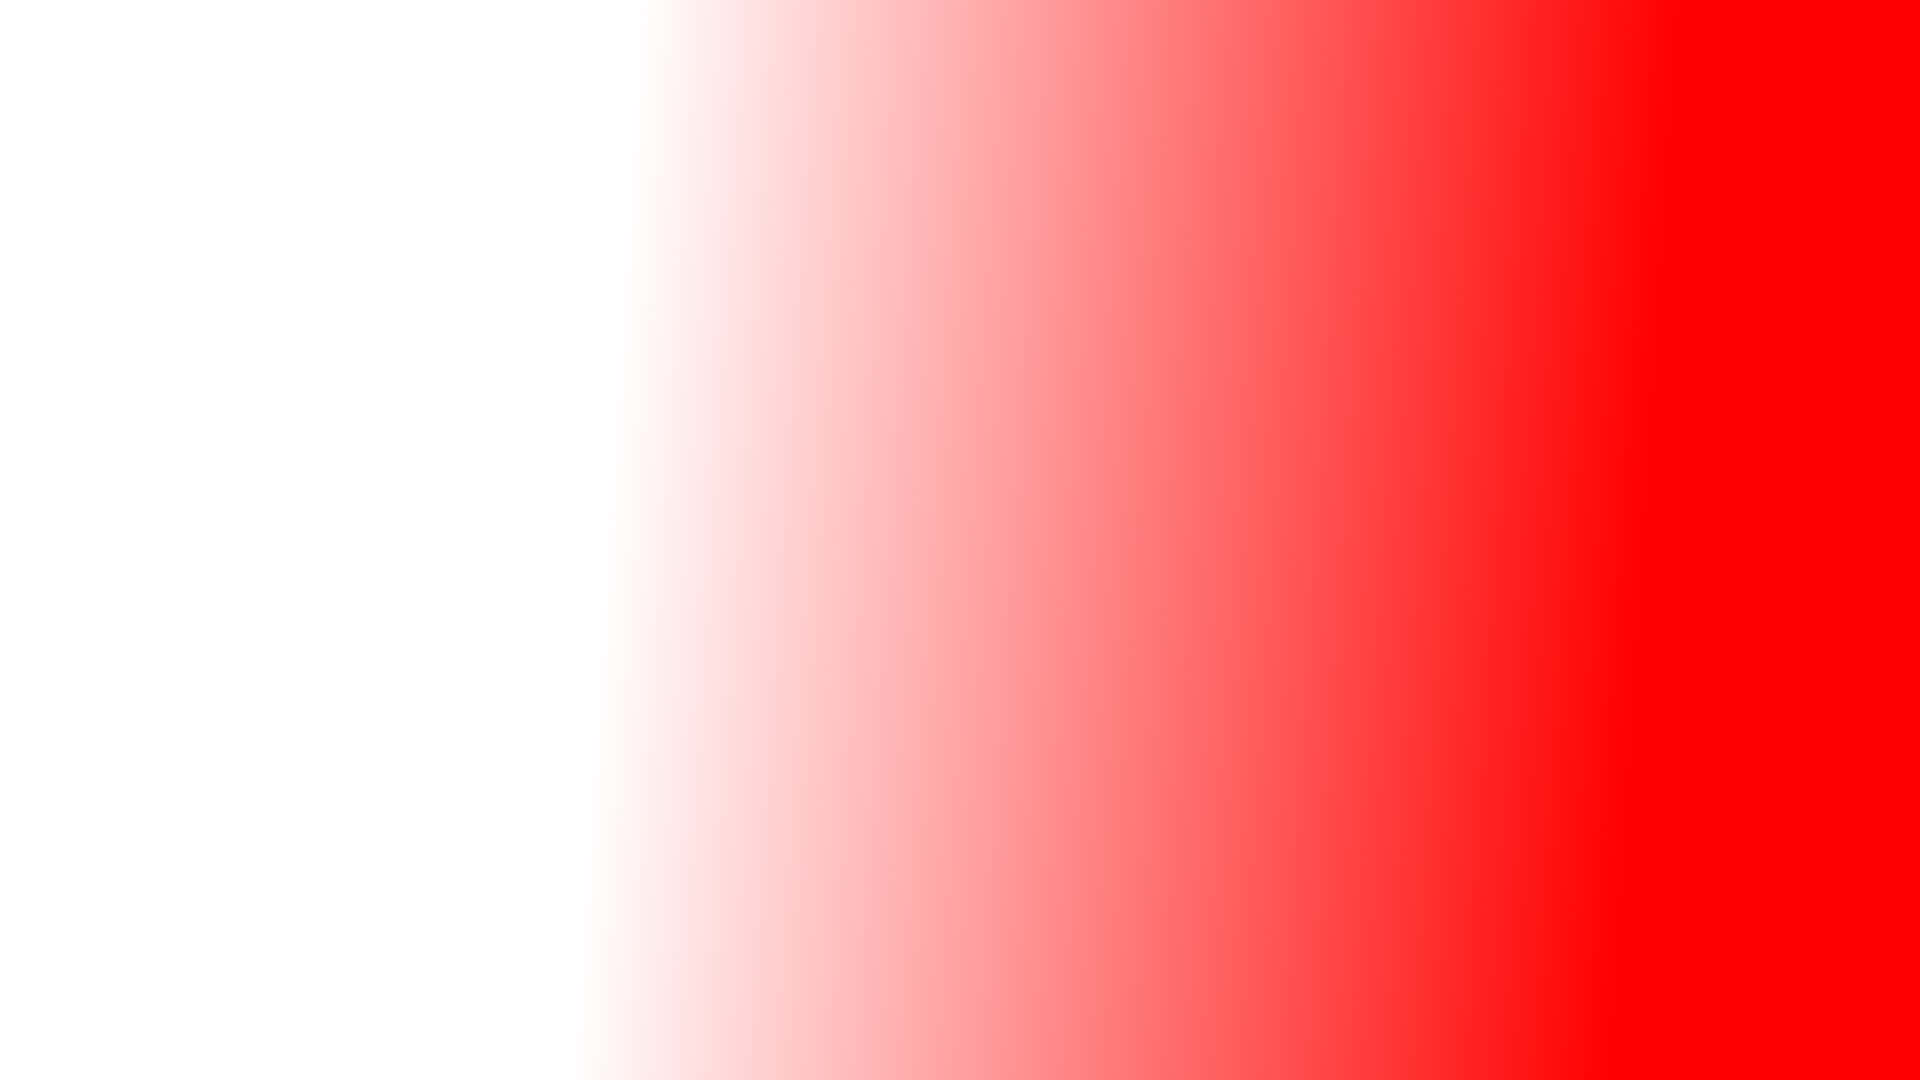 White And Red Fade 4k Background